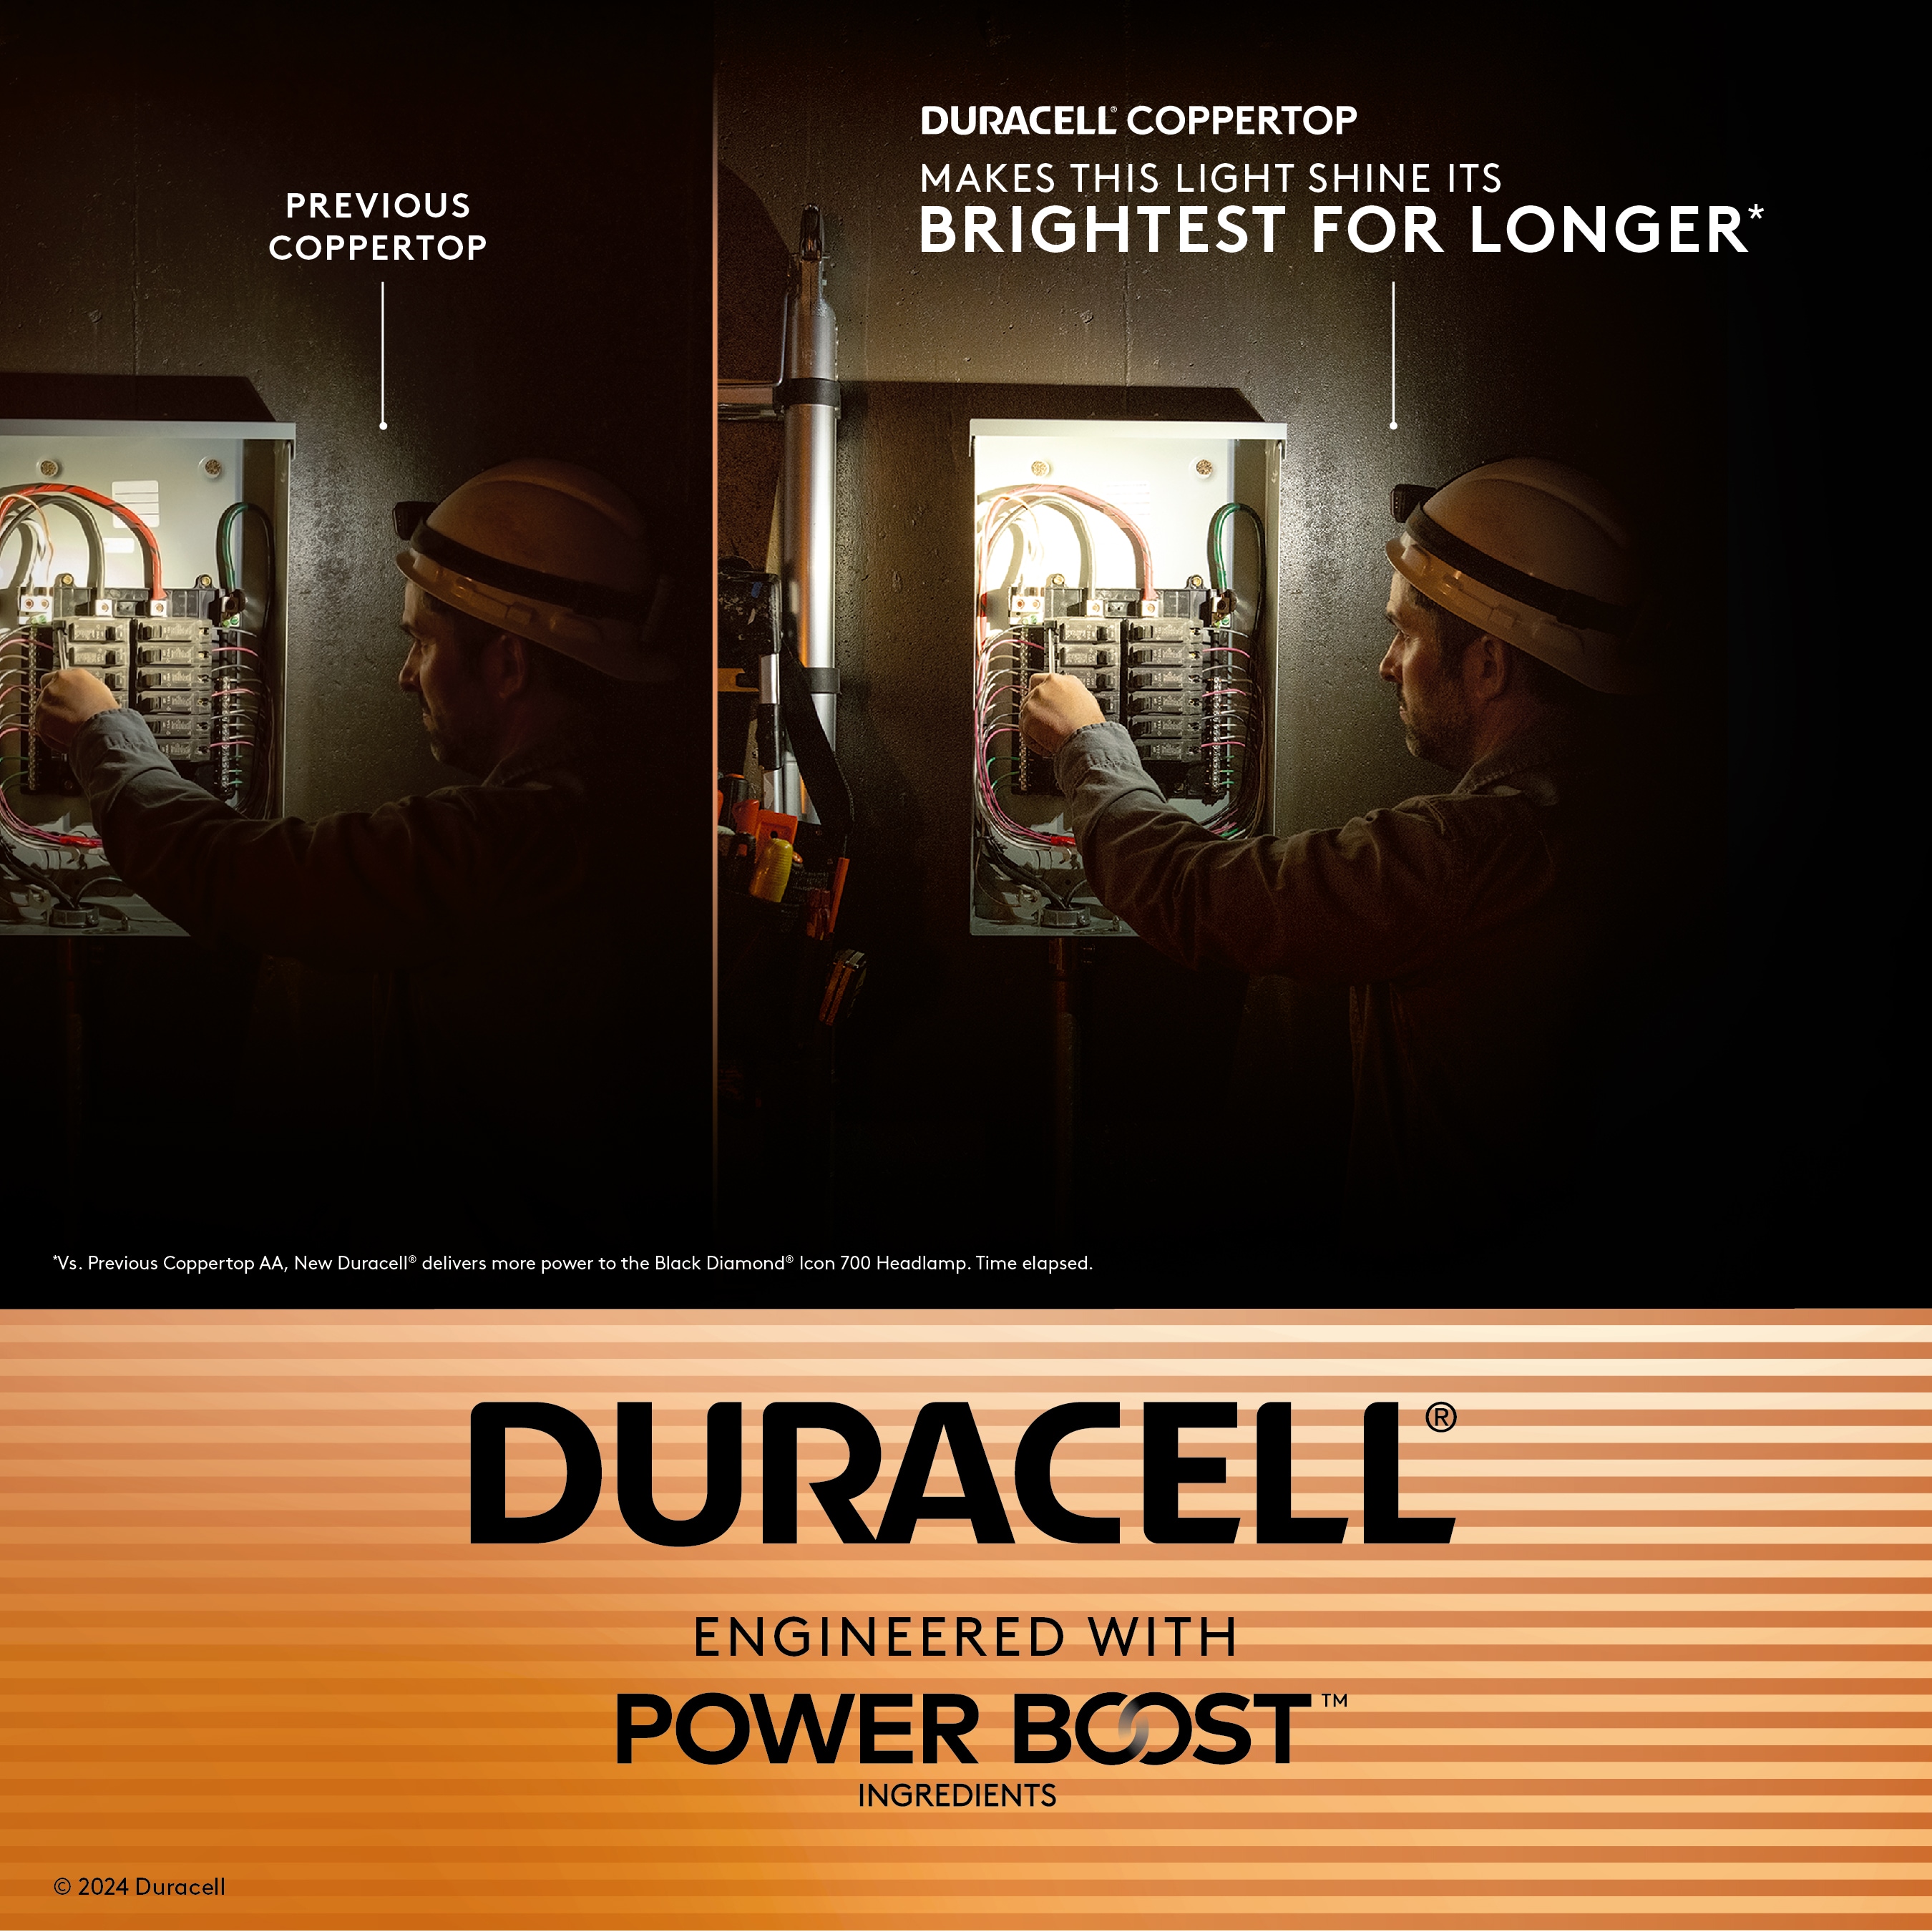 Duracell CopperTop AA Batteries, 48 ct.